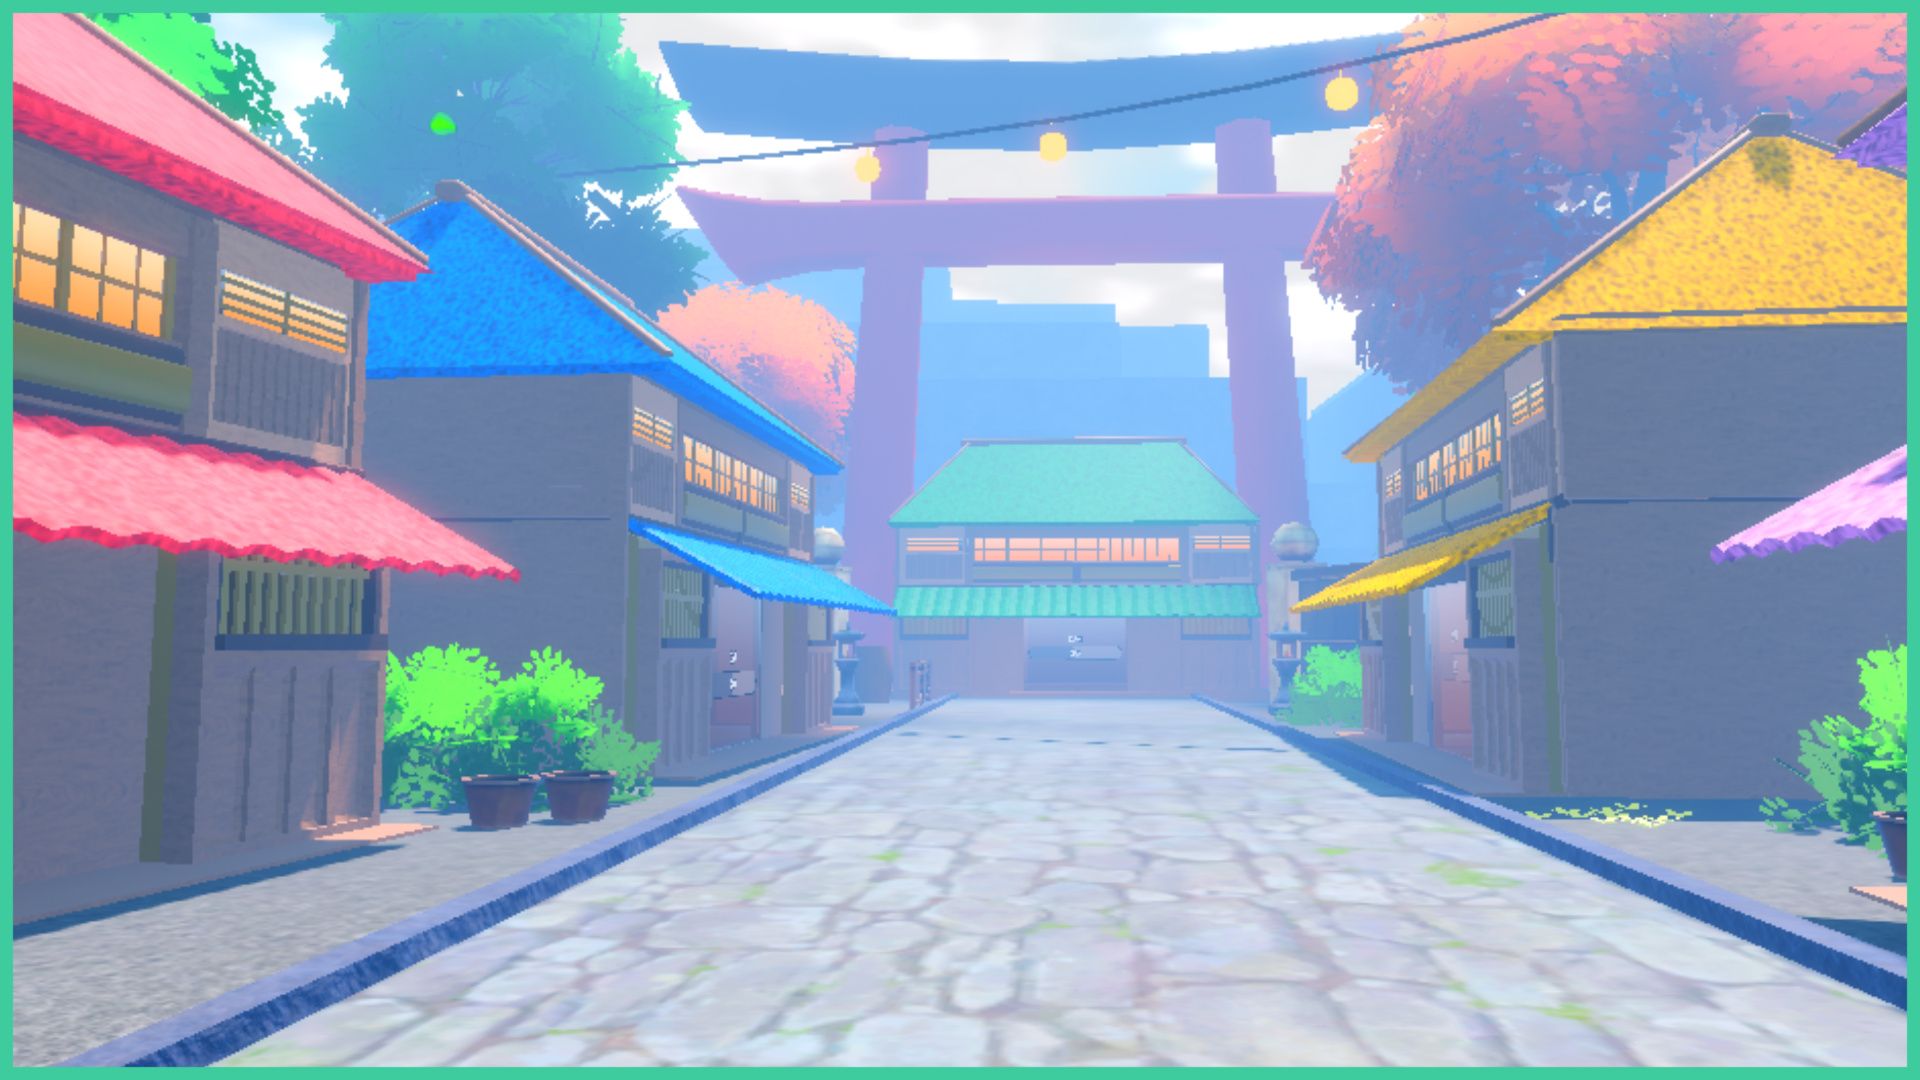 feature image for our anime last stand gon guide, the image is a screenshot of the story mode area, which is a street with a row of traditional style japanese buildings, with a large tori gate at the top of the street